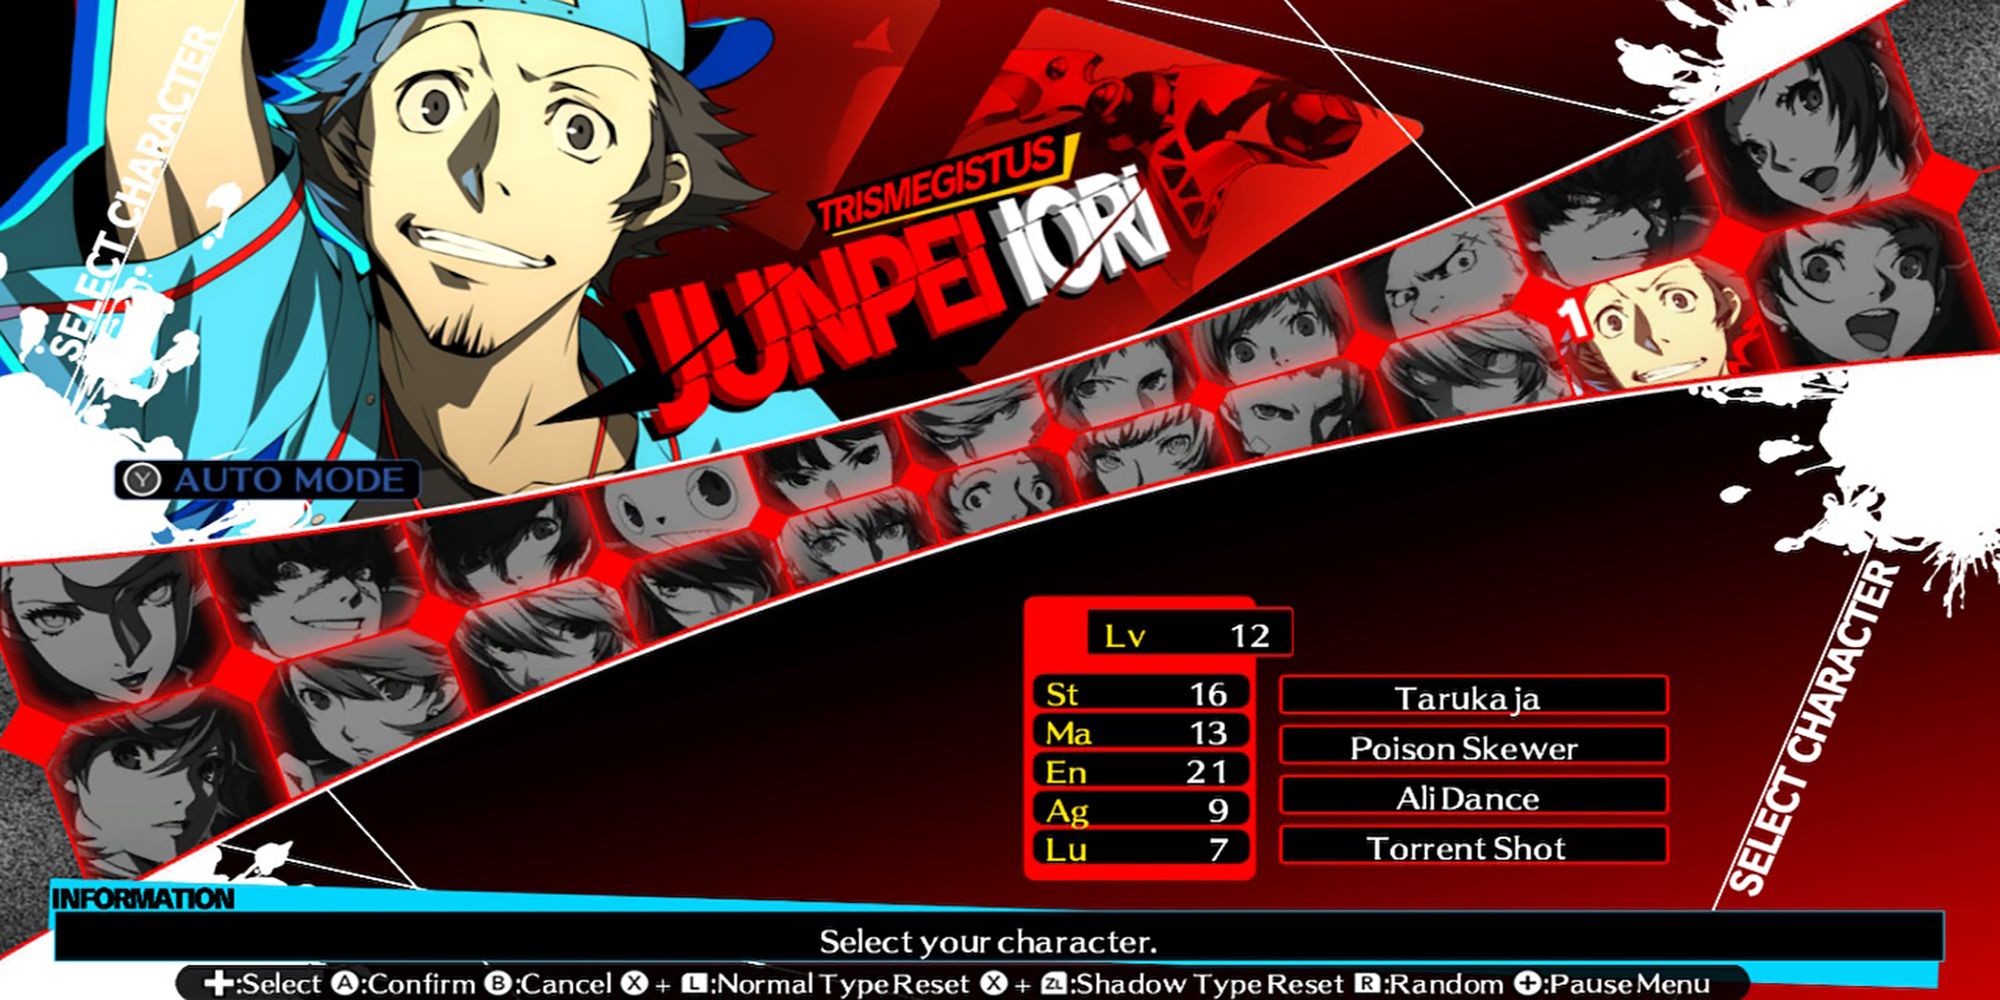 Persona 4 Arena Ultimax's character select menu lists level, stats, and skills when playing Golden Arena mode.